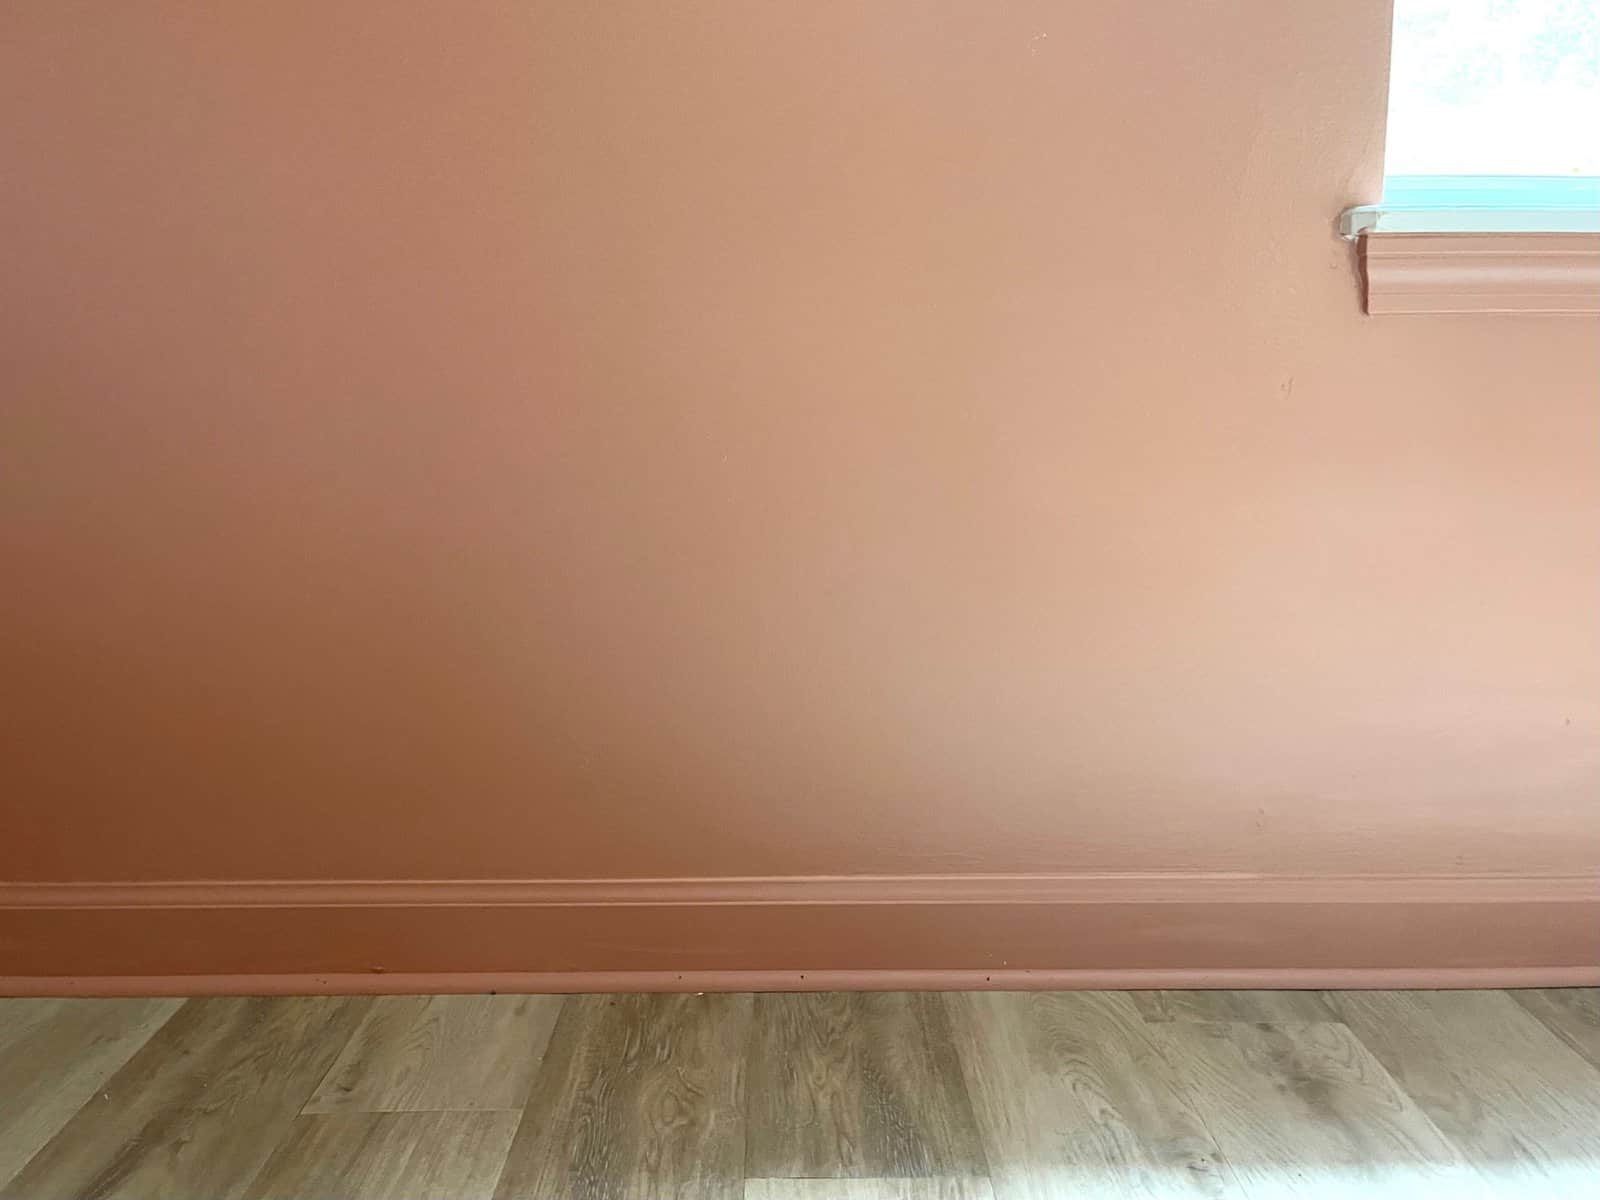 painting bedroom walls and molding the same color